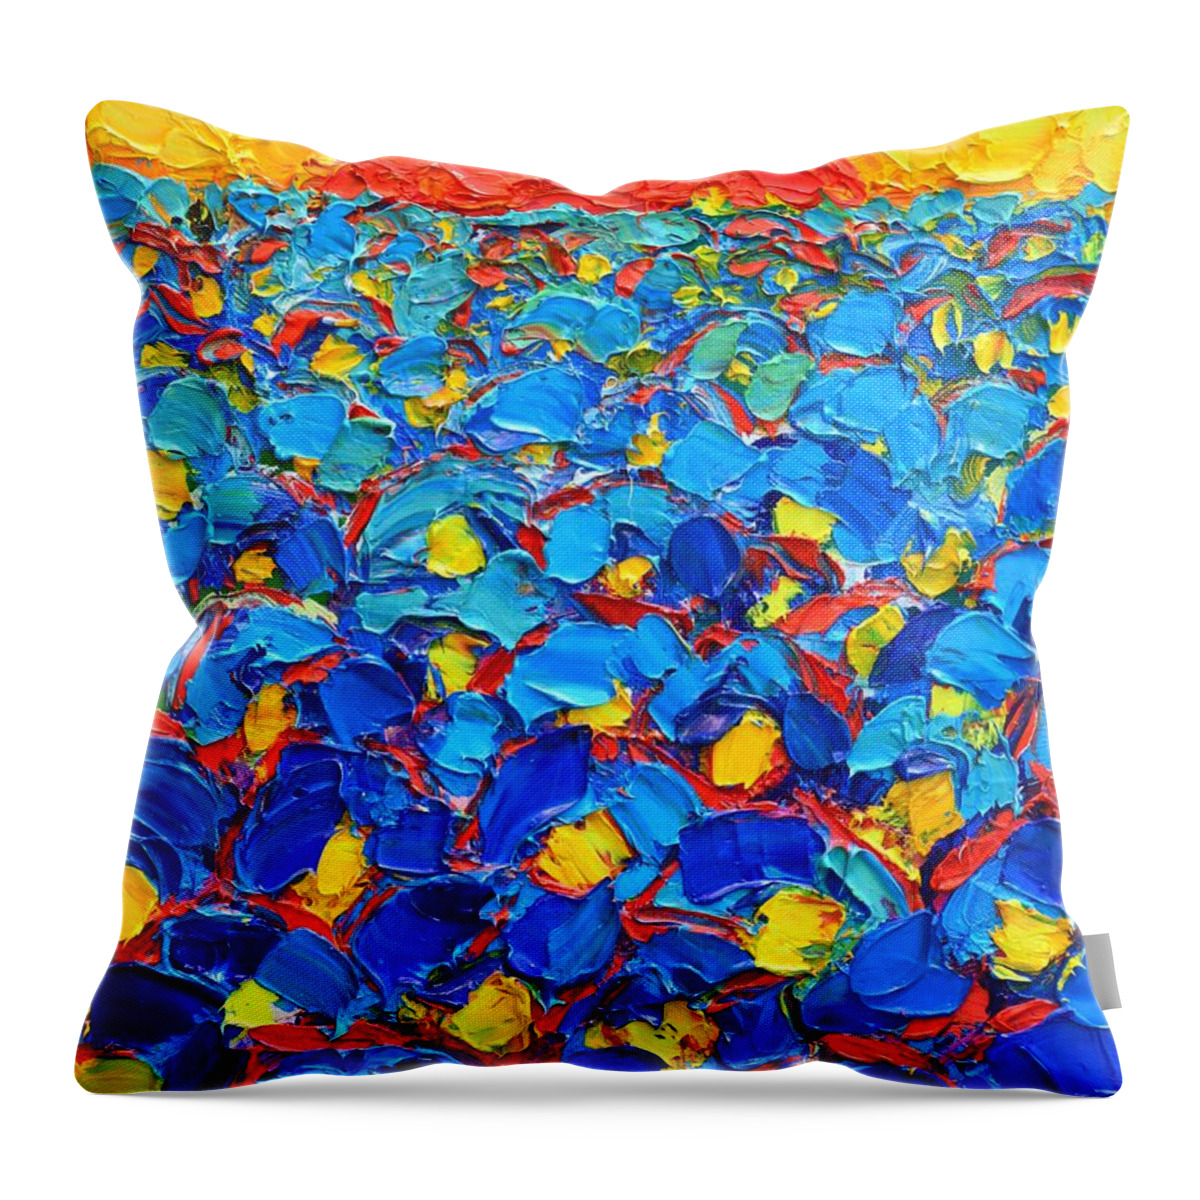 Poppies Throw Pillow featuring the painting Abstract Blue Poppies In Sunrise -original Oil Painting by Ana Maria Edulescu